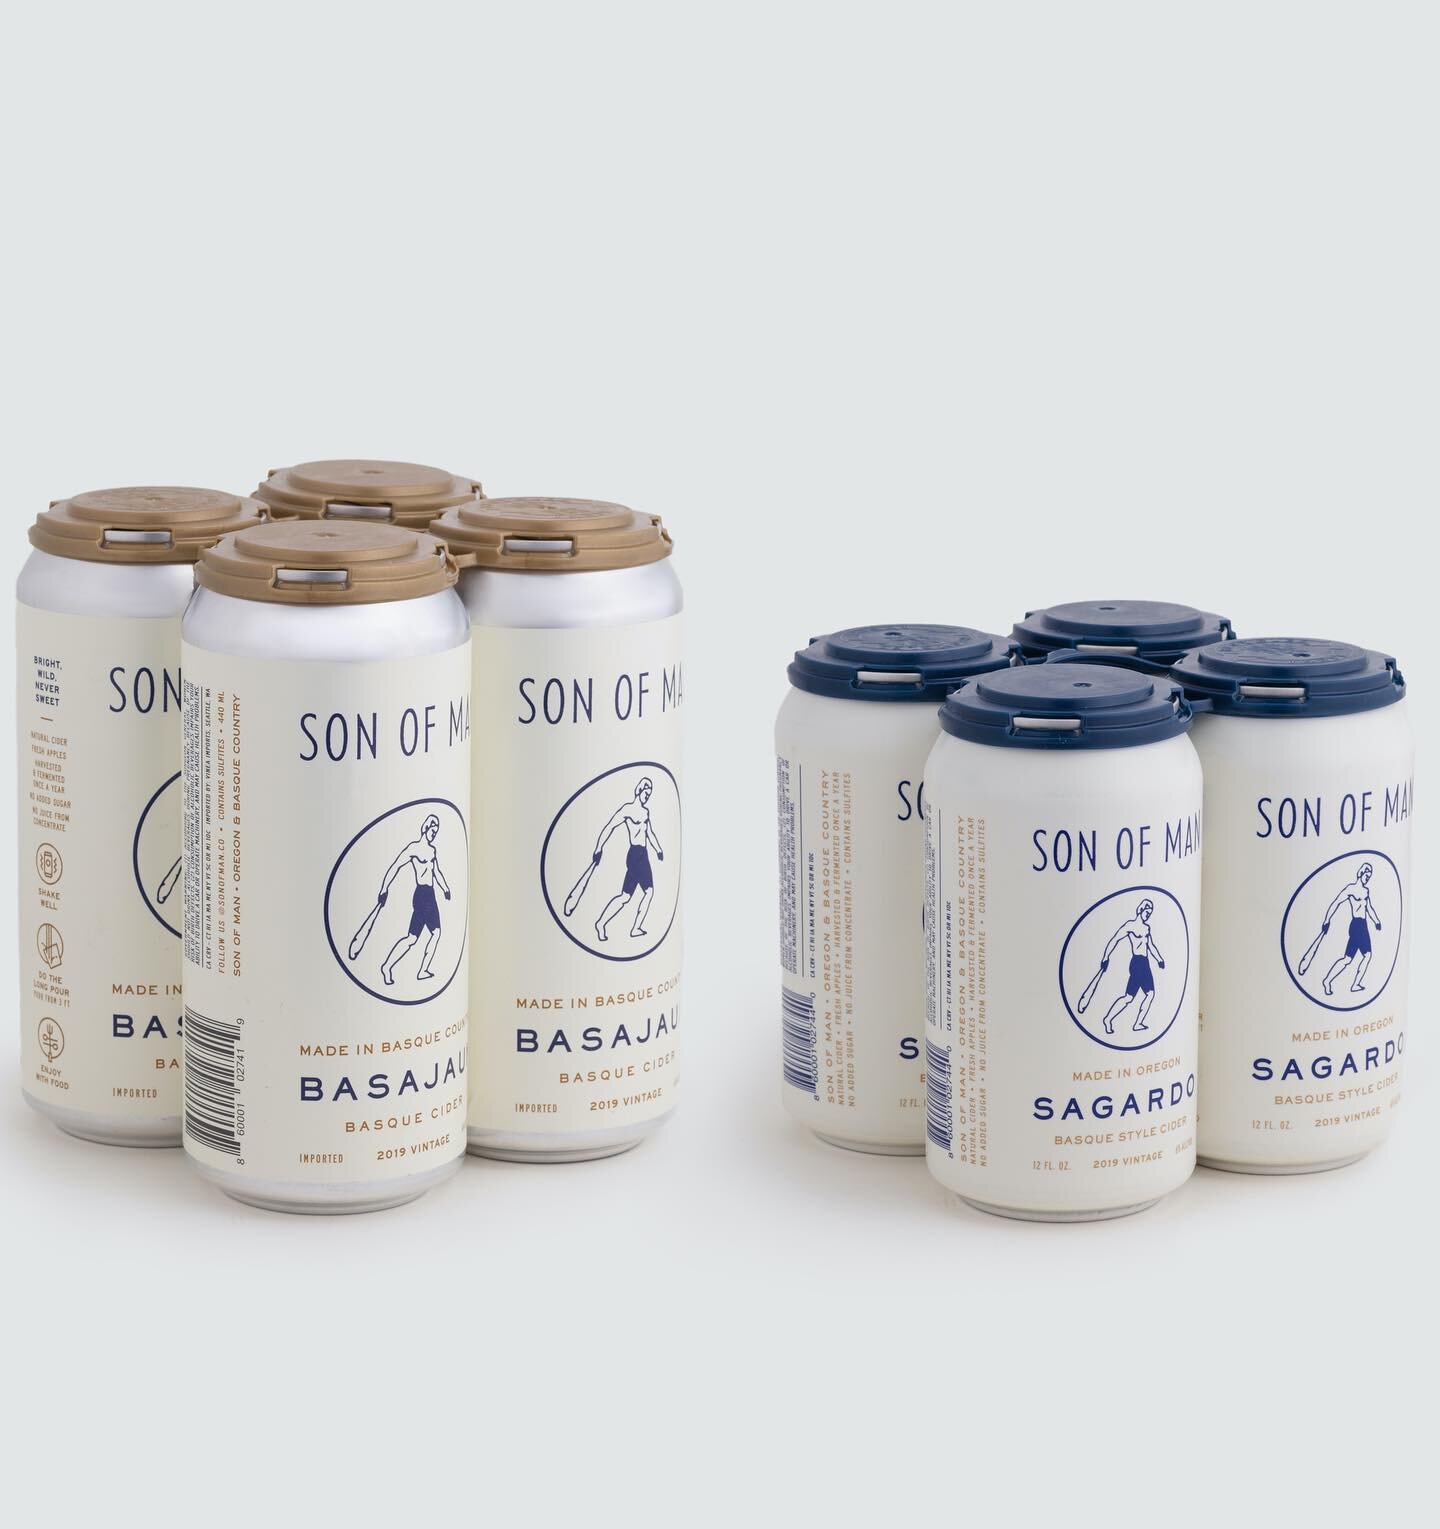 Basajaun is back! Just landed, straight from the Basque Country. Try it next to our Oregon-made Sagardo with our new mixed pack. 4 Basajaun Tallboys and 4 Sagardo cans. Now available on our webstore. Click &lsquo;Shop&rsquo; in link in bio.
-
-
-
-
#